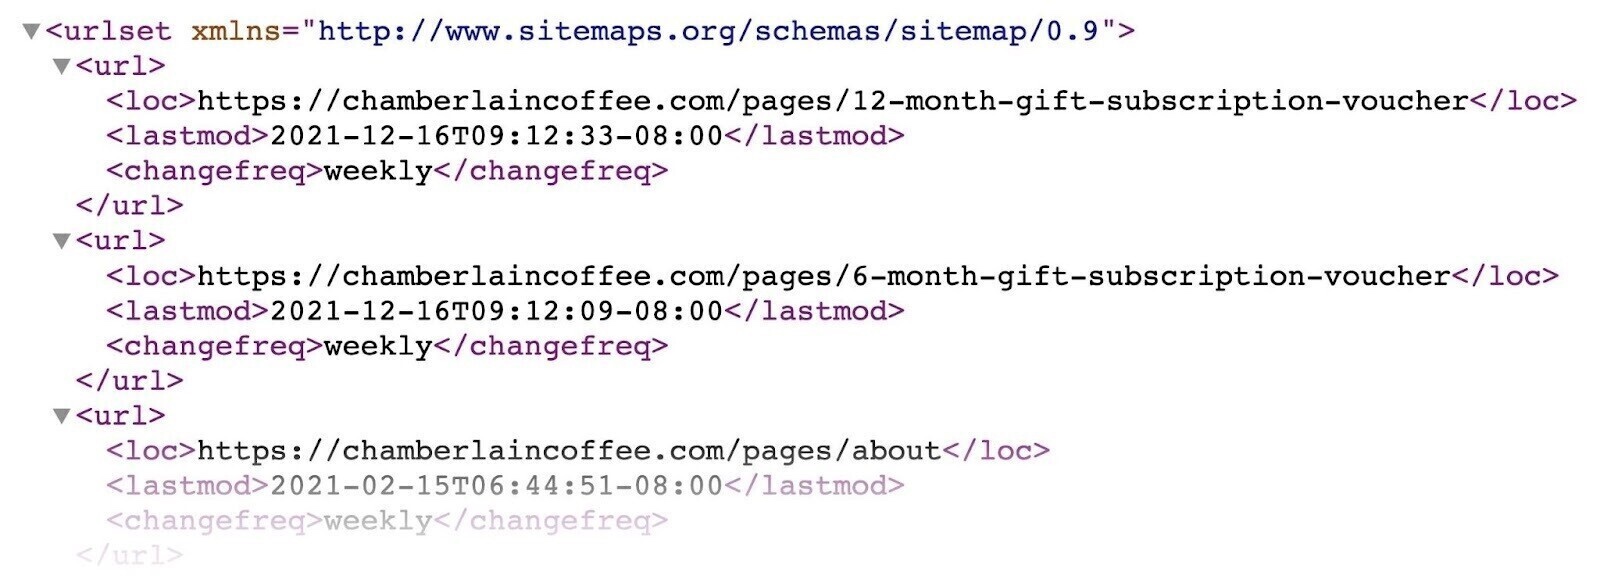 Example of an XML sitemap which includes list of indexed URLs, a “lastmod” attribute, a "hreflang" attribute, etc.